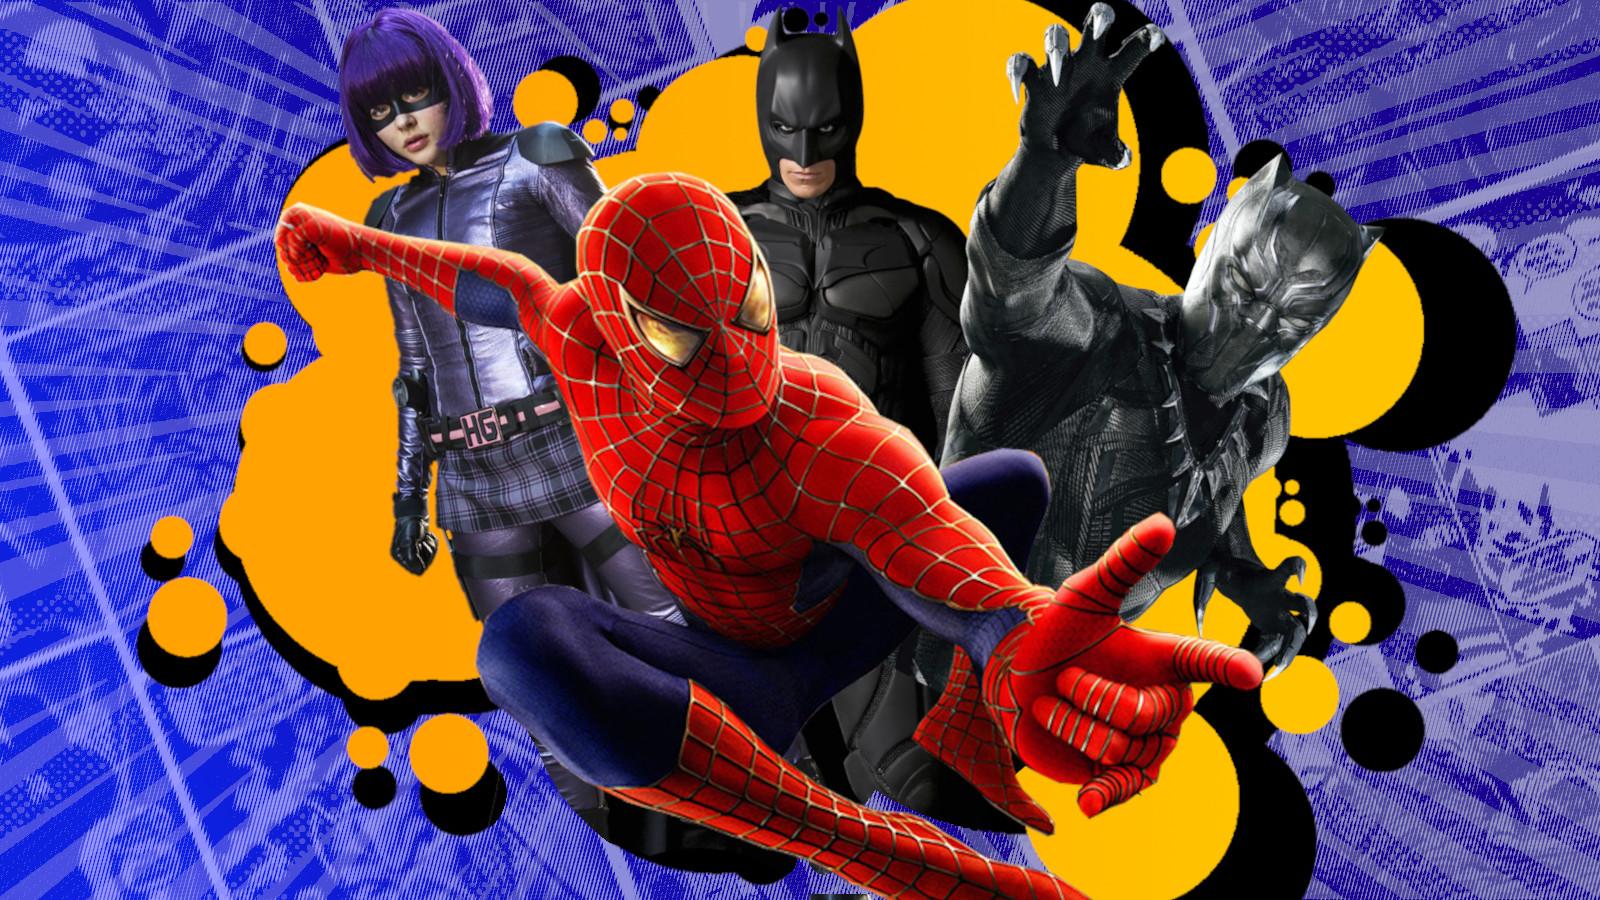 Spider-Man, Batman, Hit Girl and Black panther represent our picks for the best superhero movies of all time.